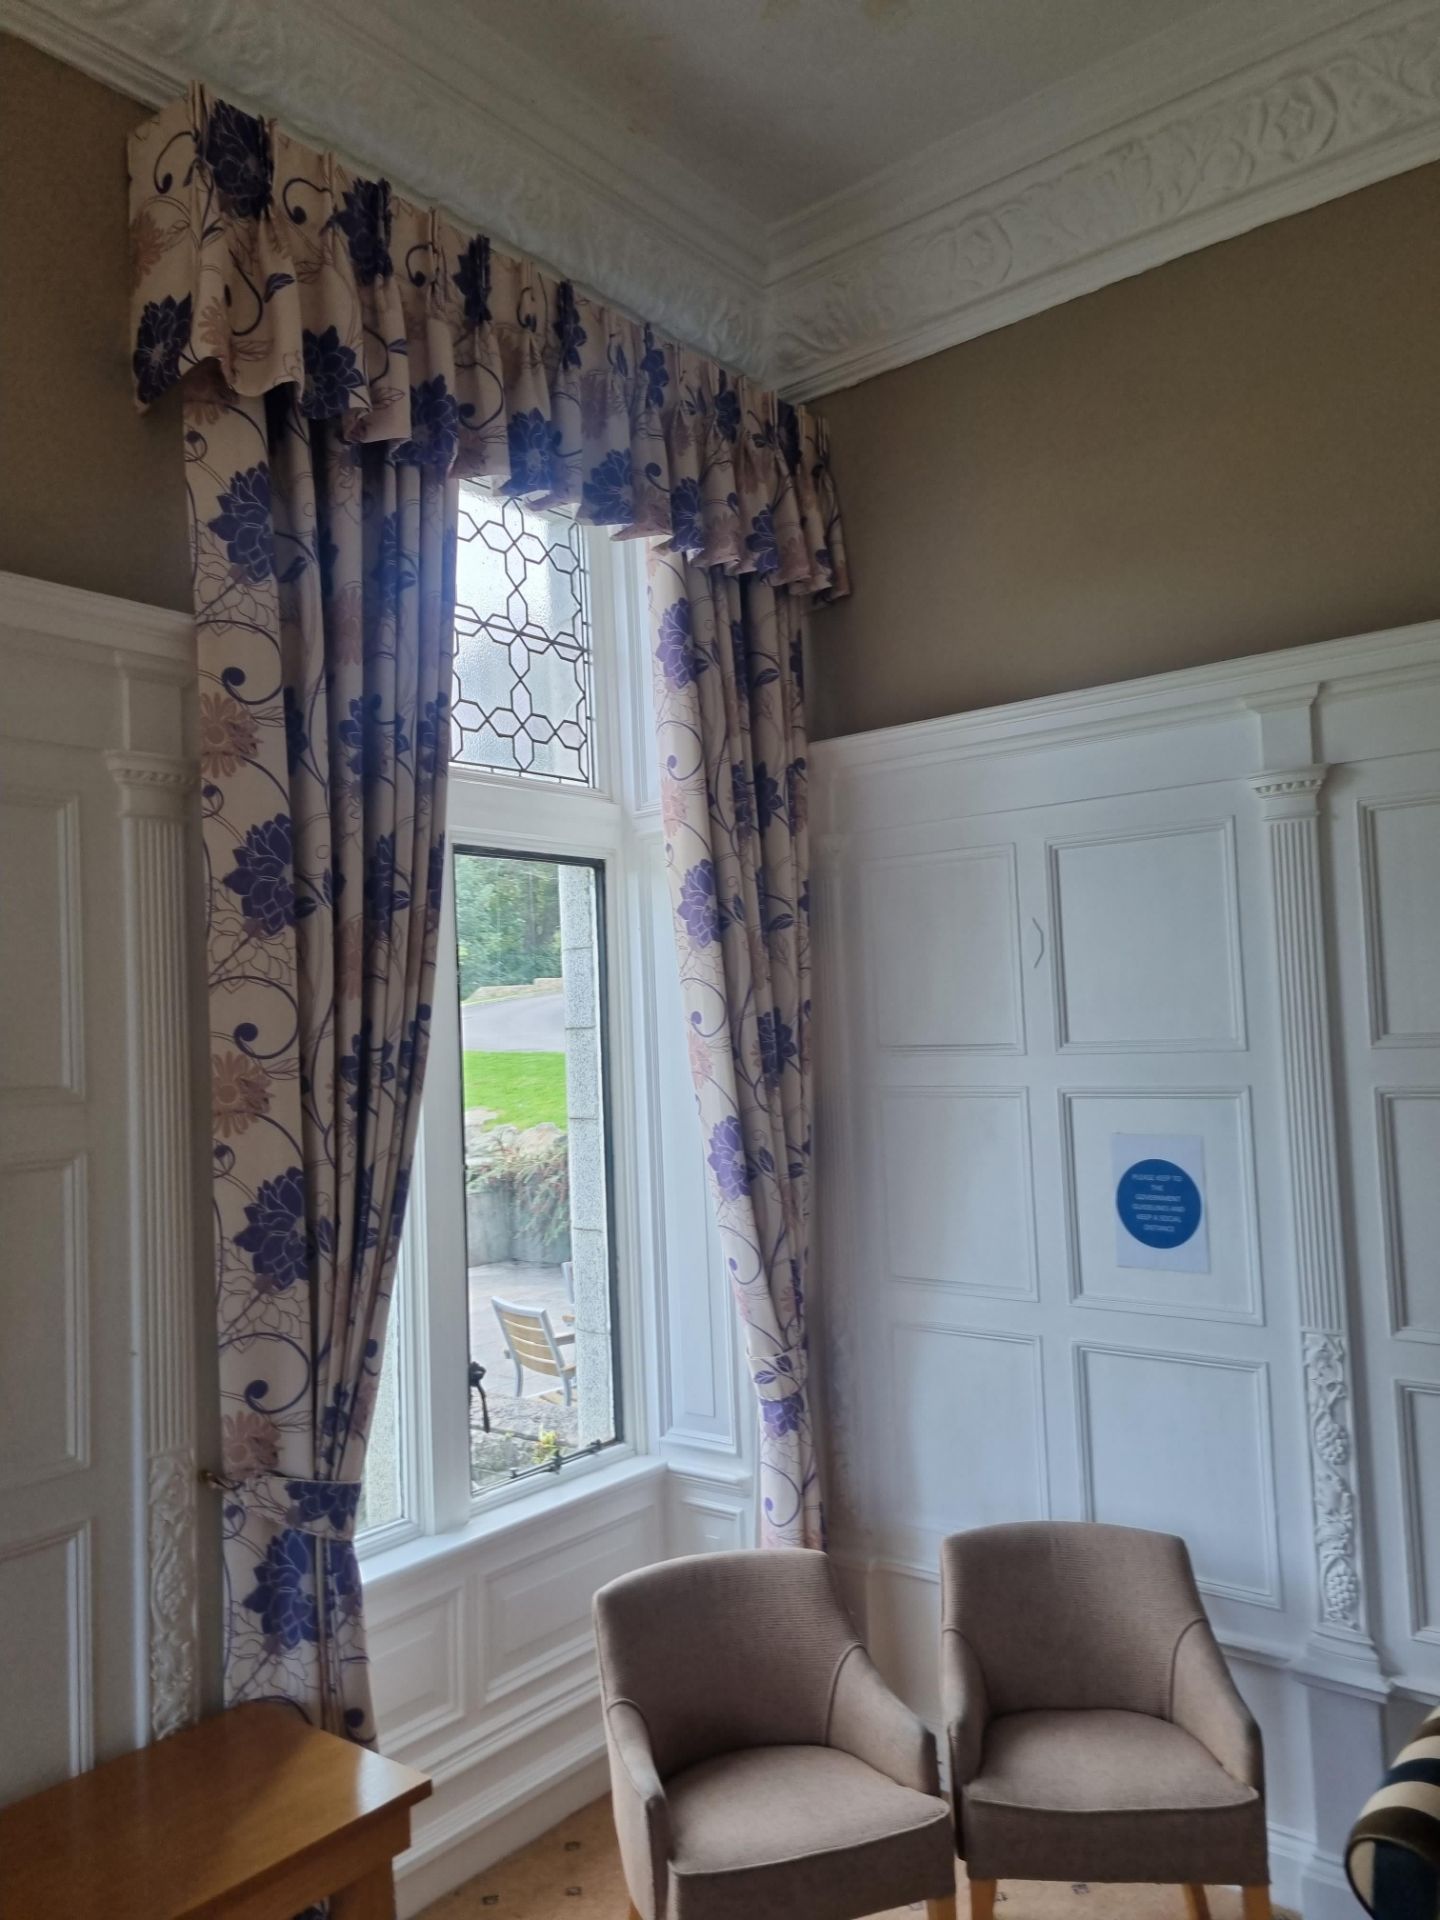 4 Sets Of Cream And Blue Fully Lined Curtains With Matching Pelmet And Tie Backs D3300mm W 1500mm, D - Image 4 of 5